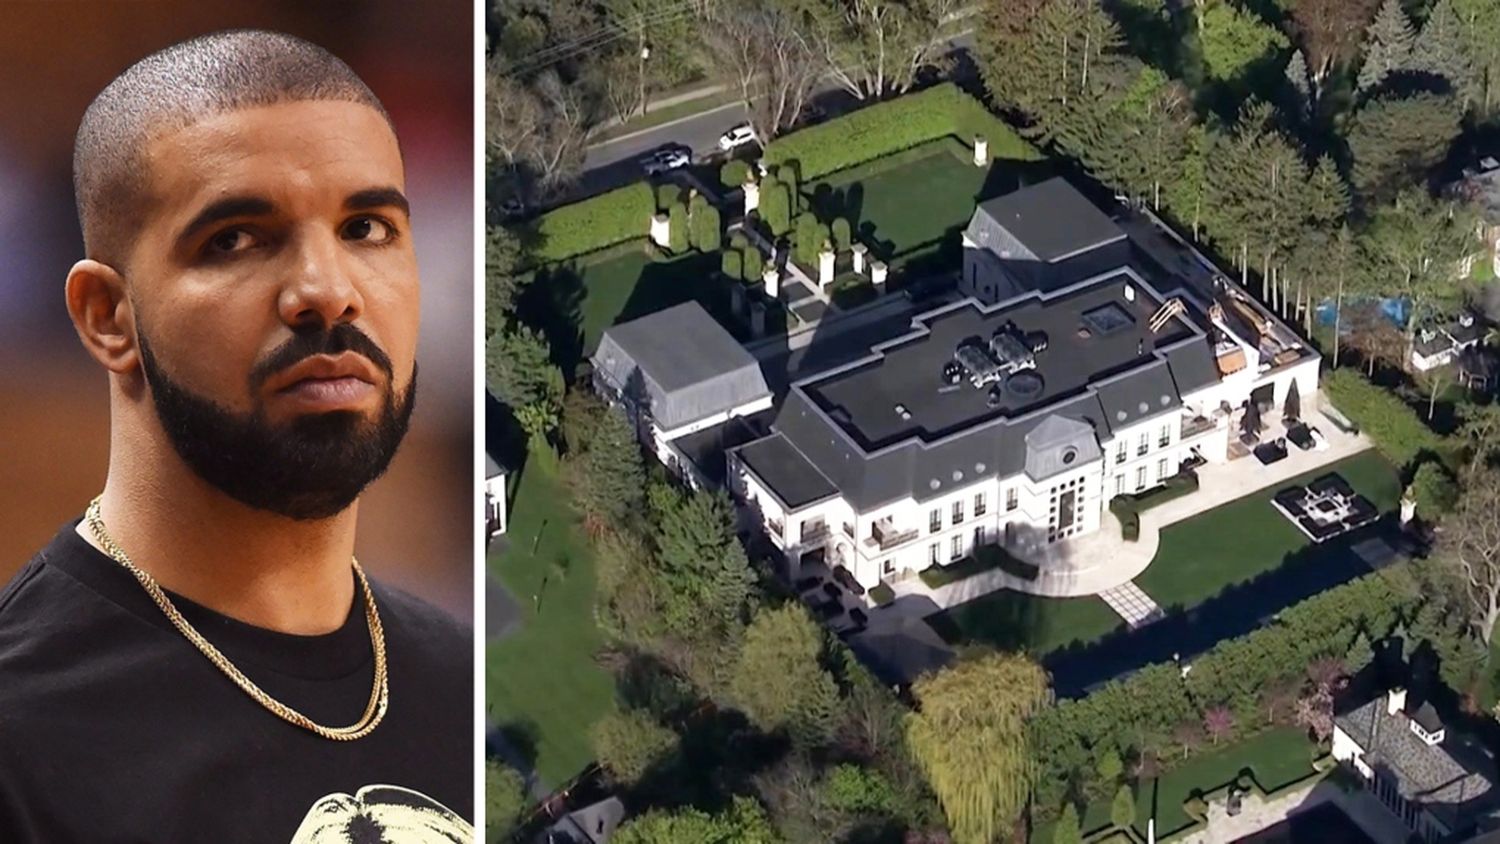 Police investigating shooting outside of Drake's home